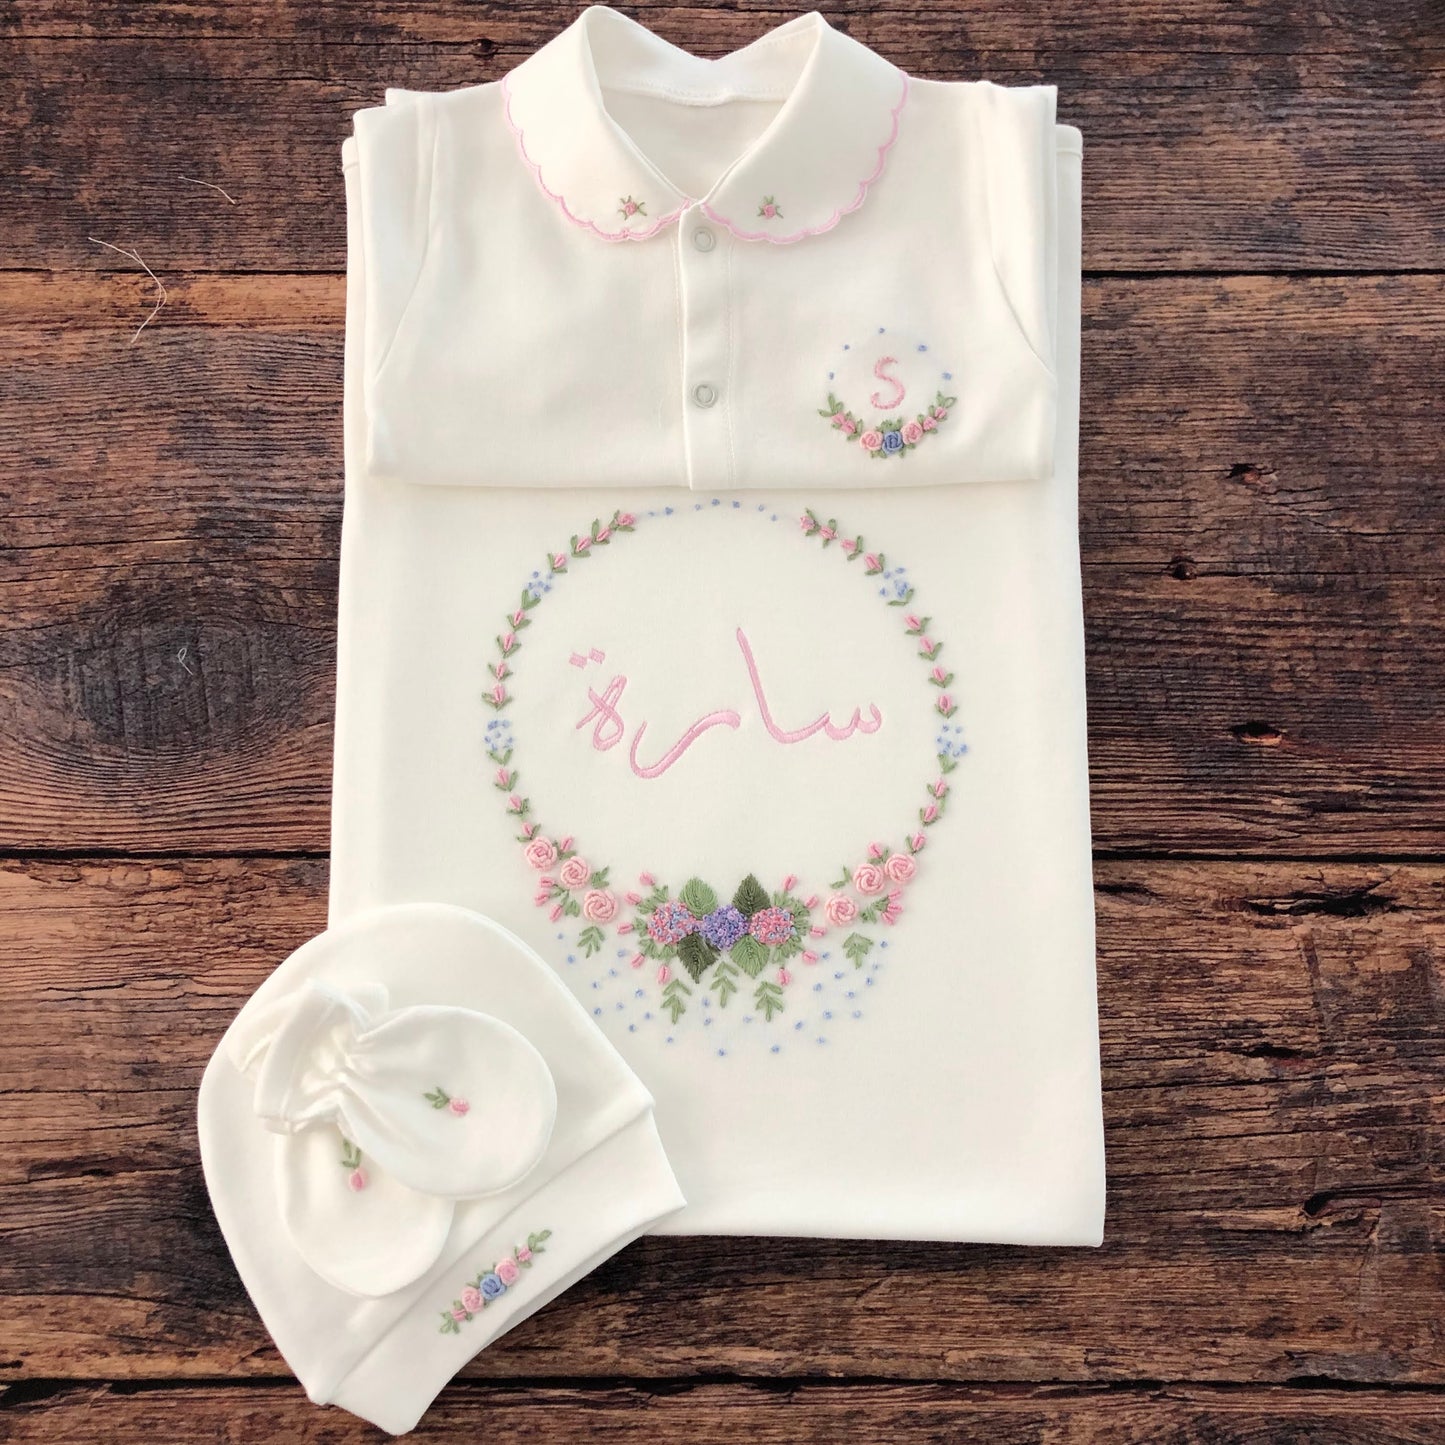 Personalized Hand Embroidery Clothing Set (0-3 Months) (4 Pcs, Sleepsuit, Blanket, Beanie, Mittens) | Hydrangea | Pink